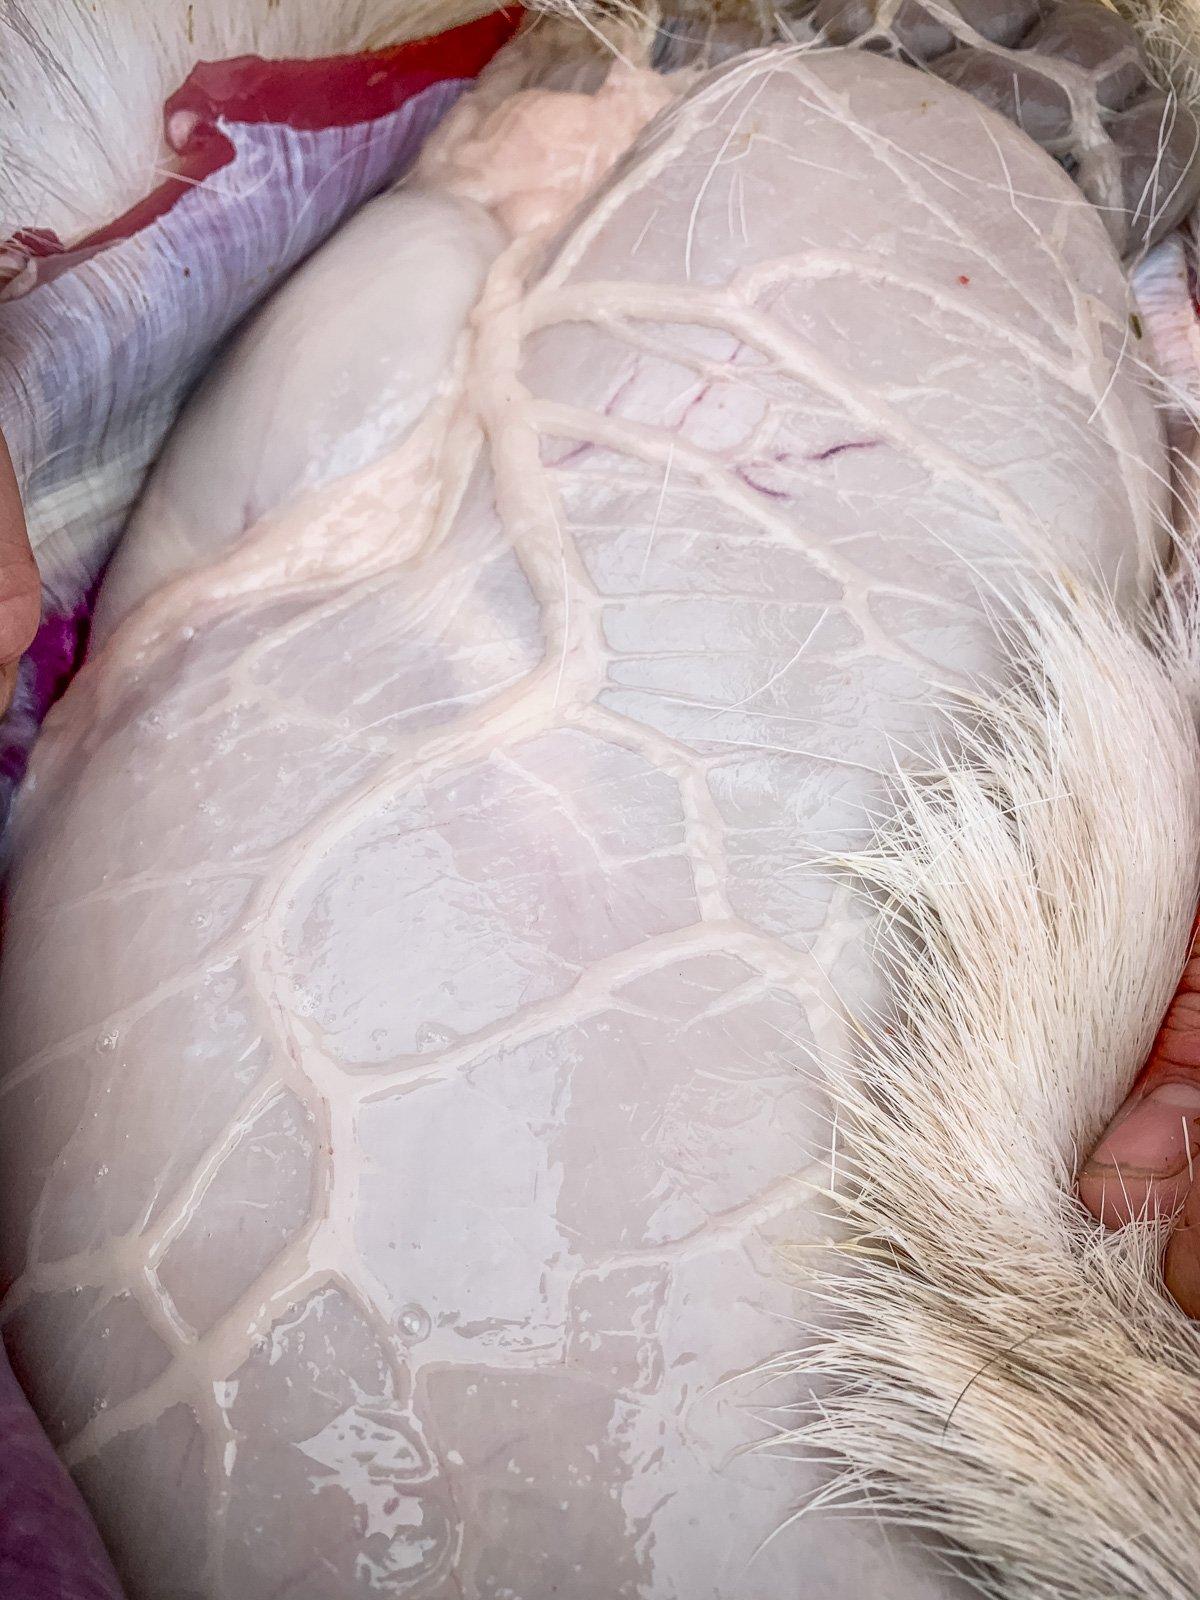 Caul fat can be found surrounding the stomach and other internal organs of your deer.